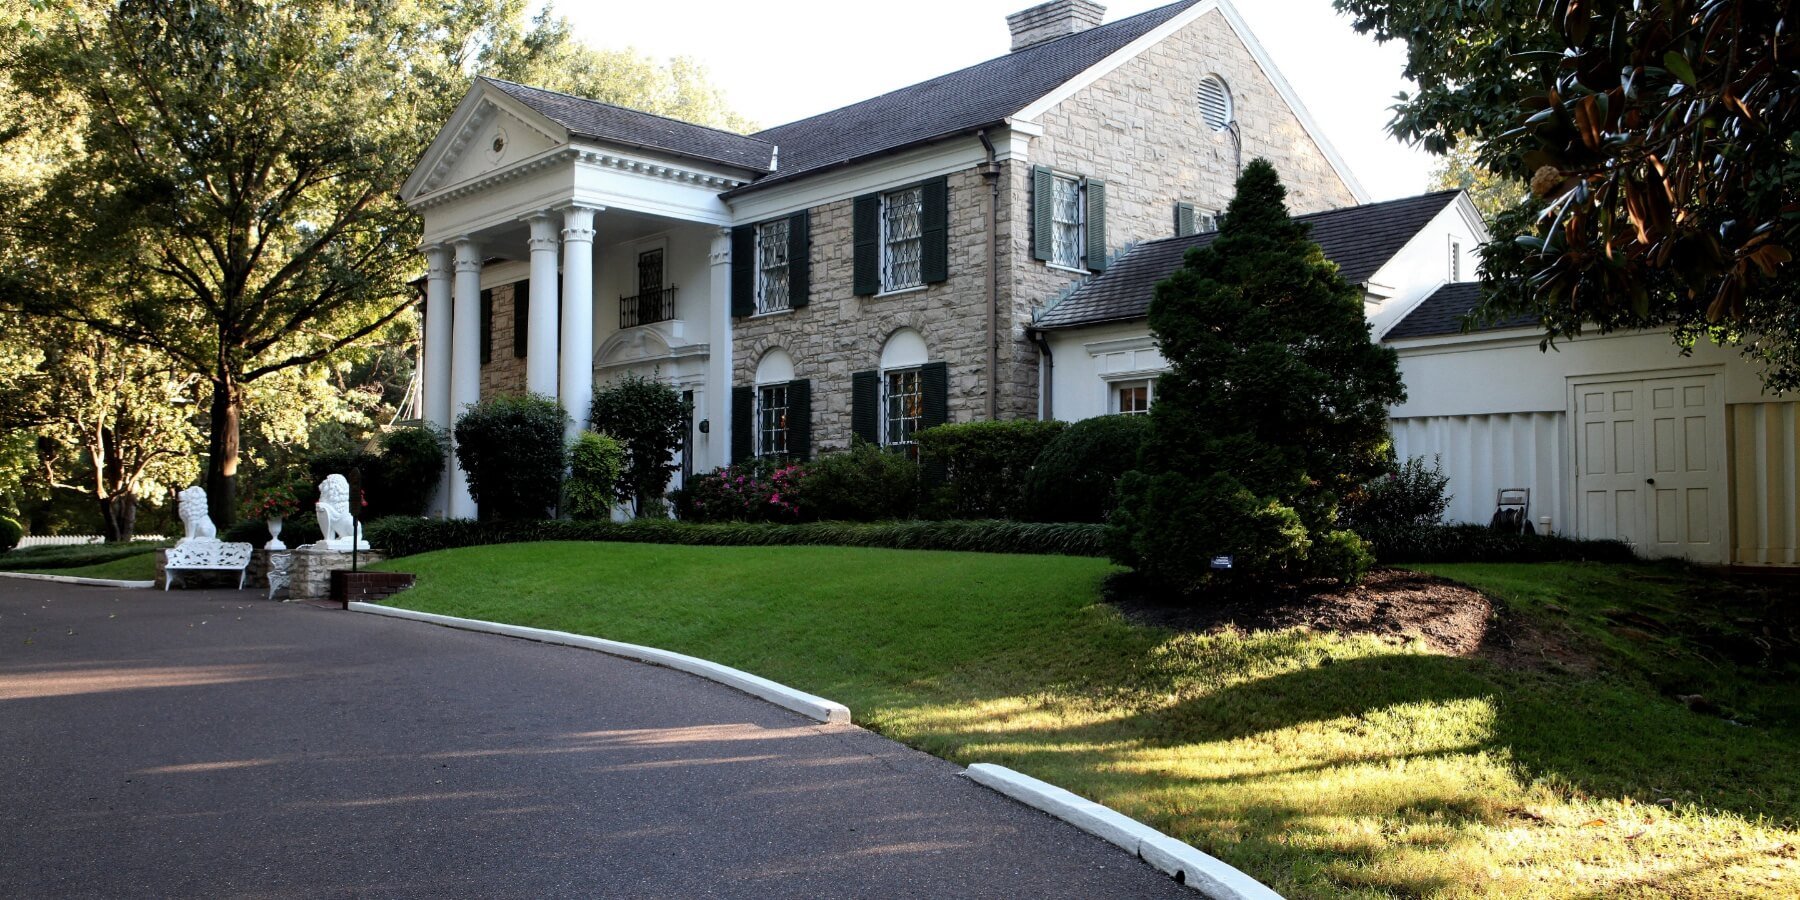 Elvis Presley’s Graceland: How Many People Visit the Historic Home Each Year?